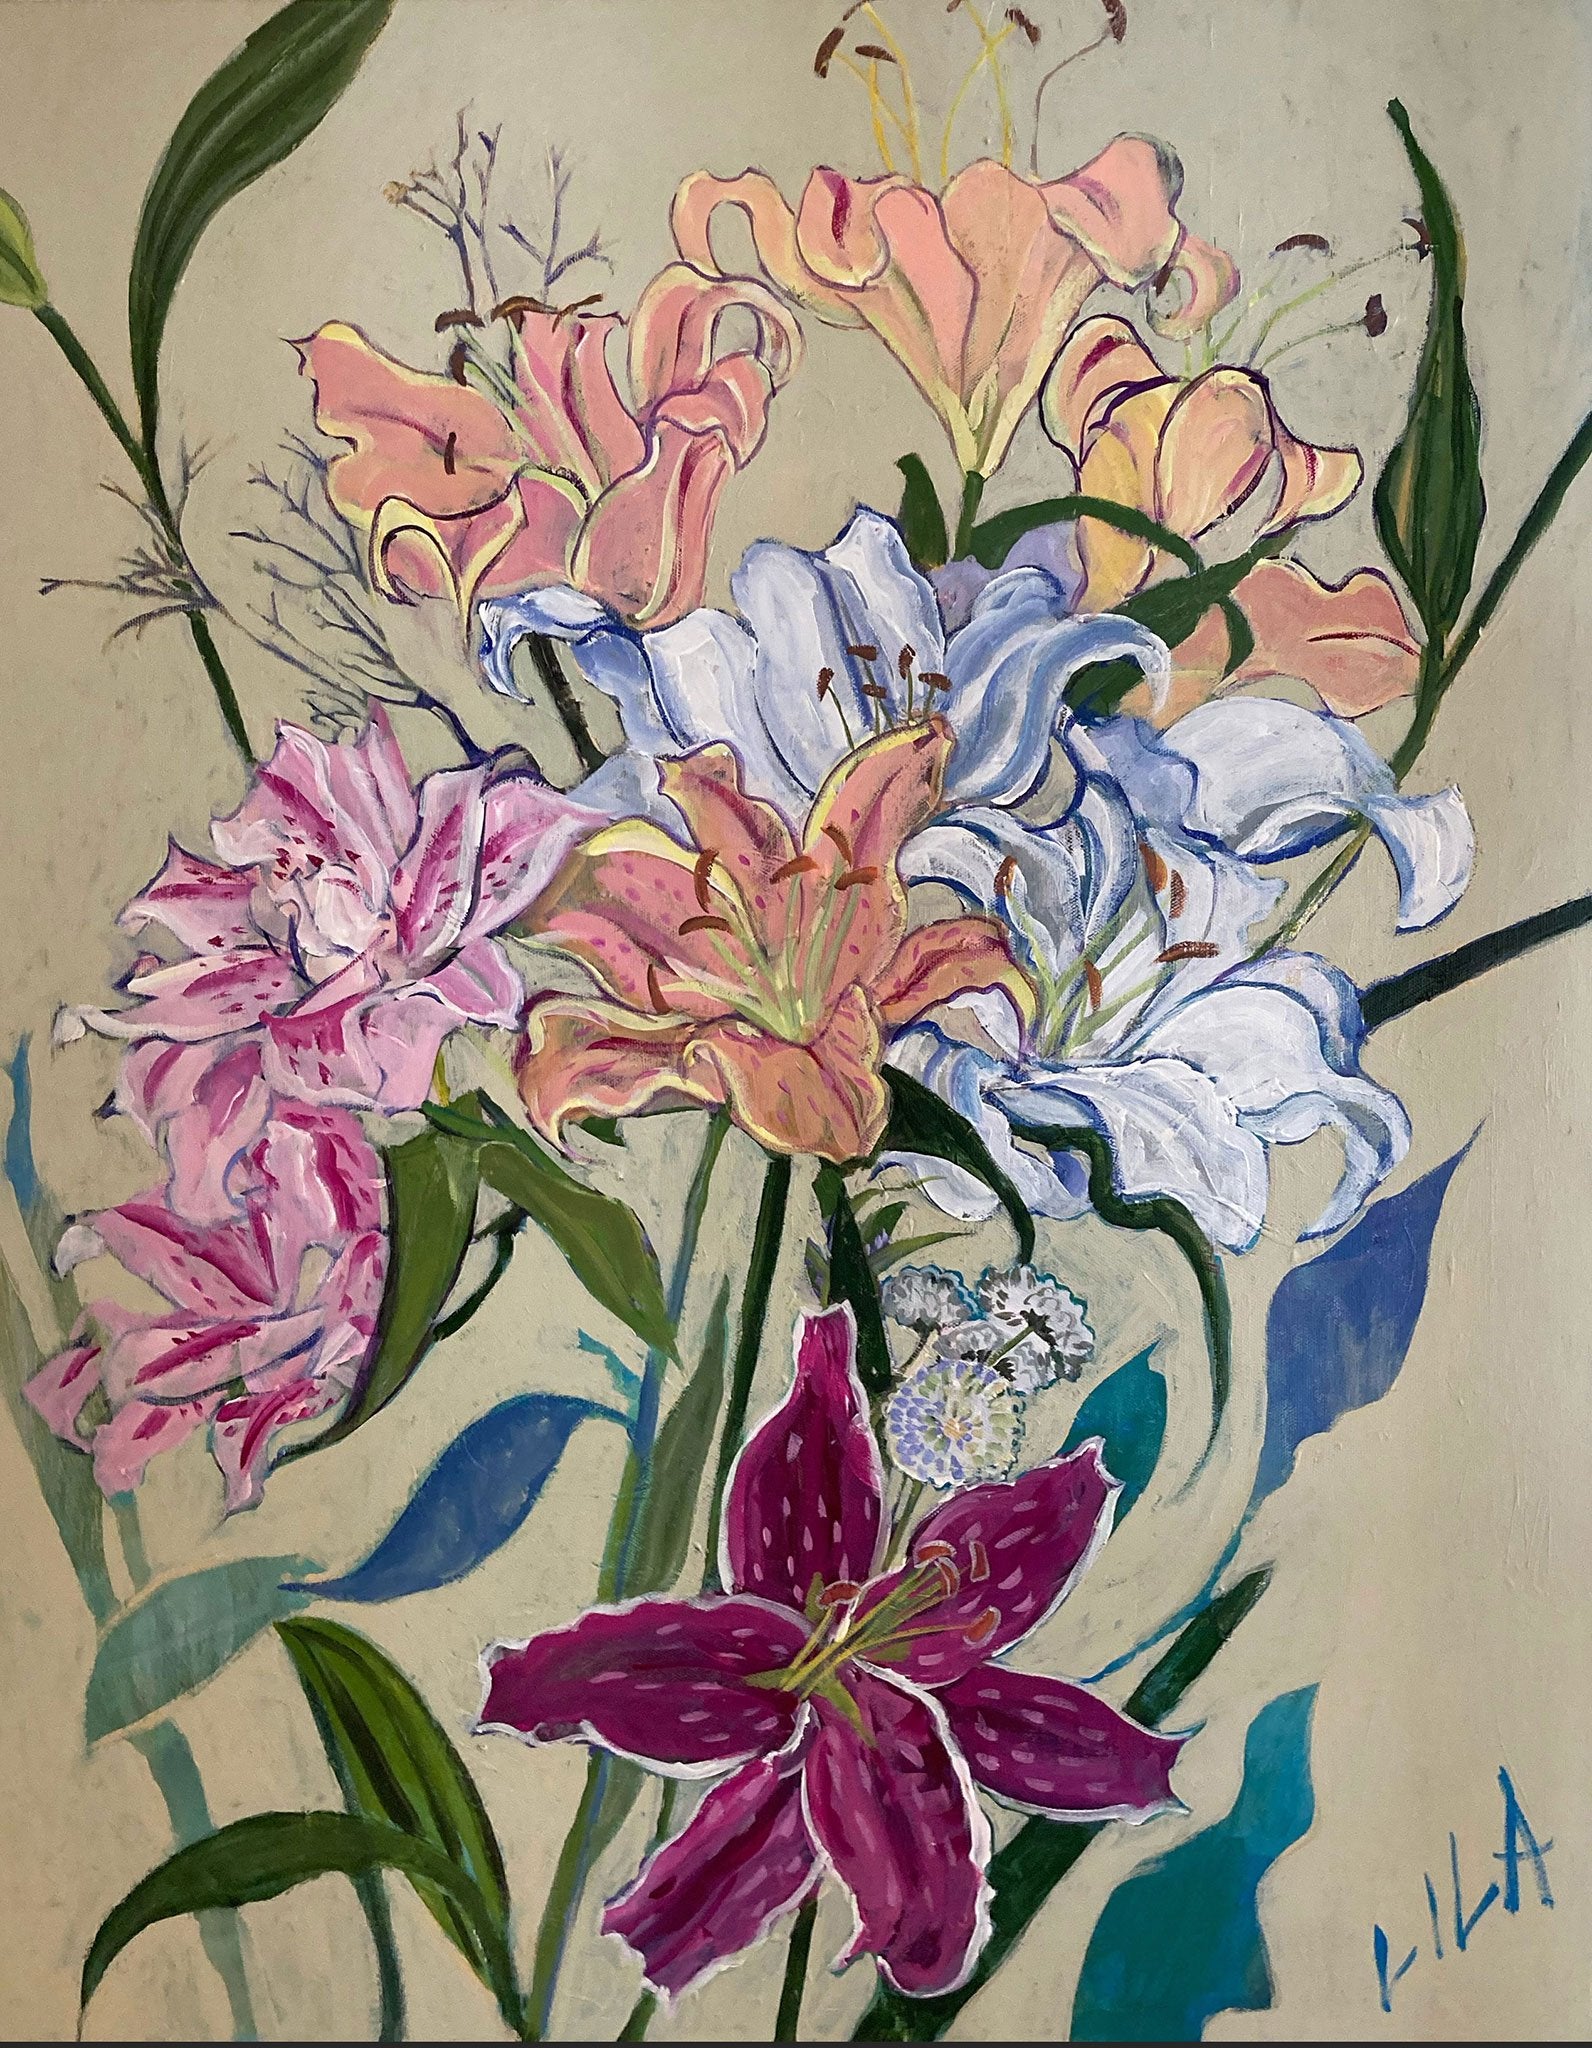 C-LB364 The Most Beautiful Lilies in the World 2 24x30 01-2021 Acrylic Painting by Lila Bacon